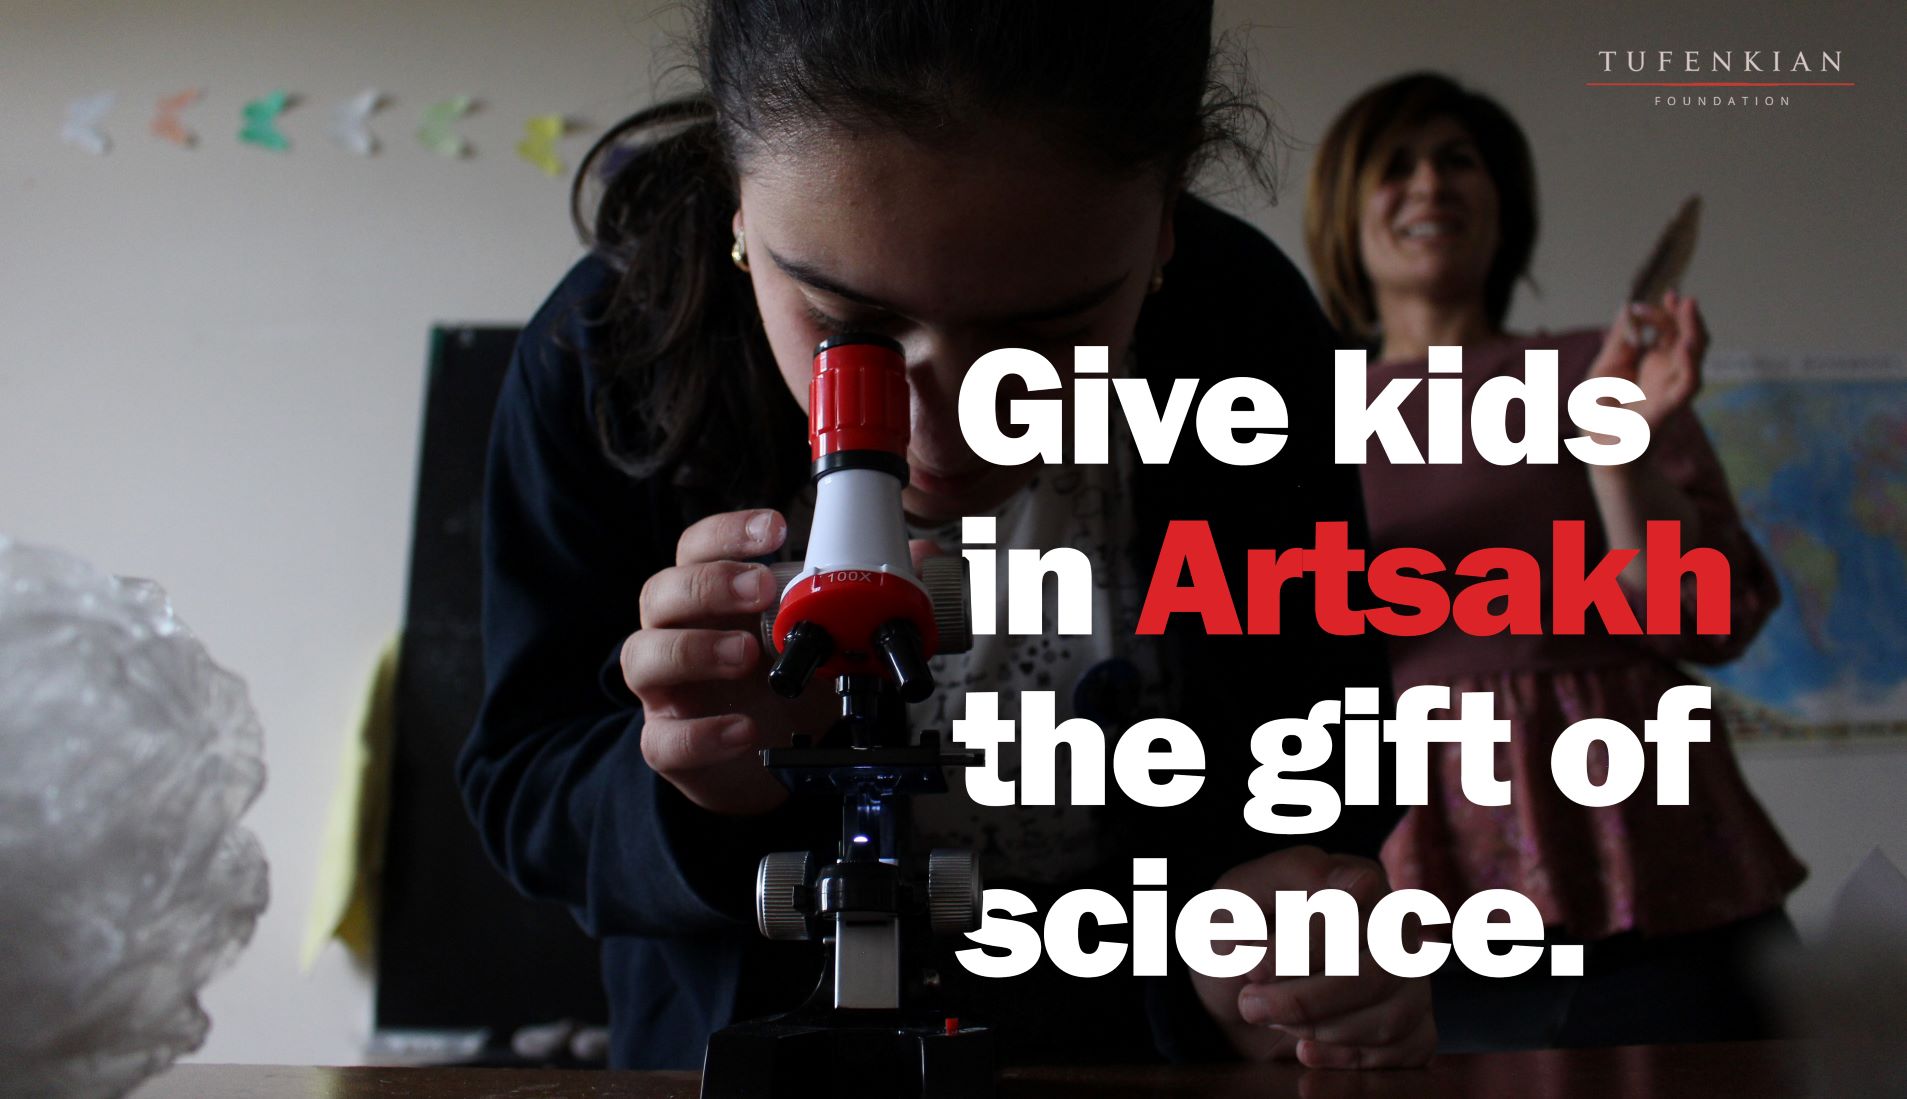 Online fundraiser to provide biology and chemistry lab kits to every school in Artsakh